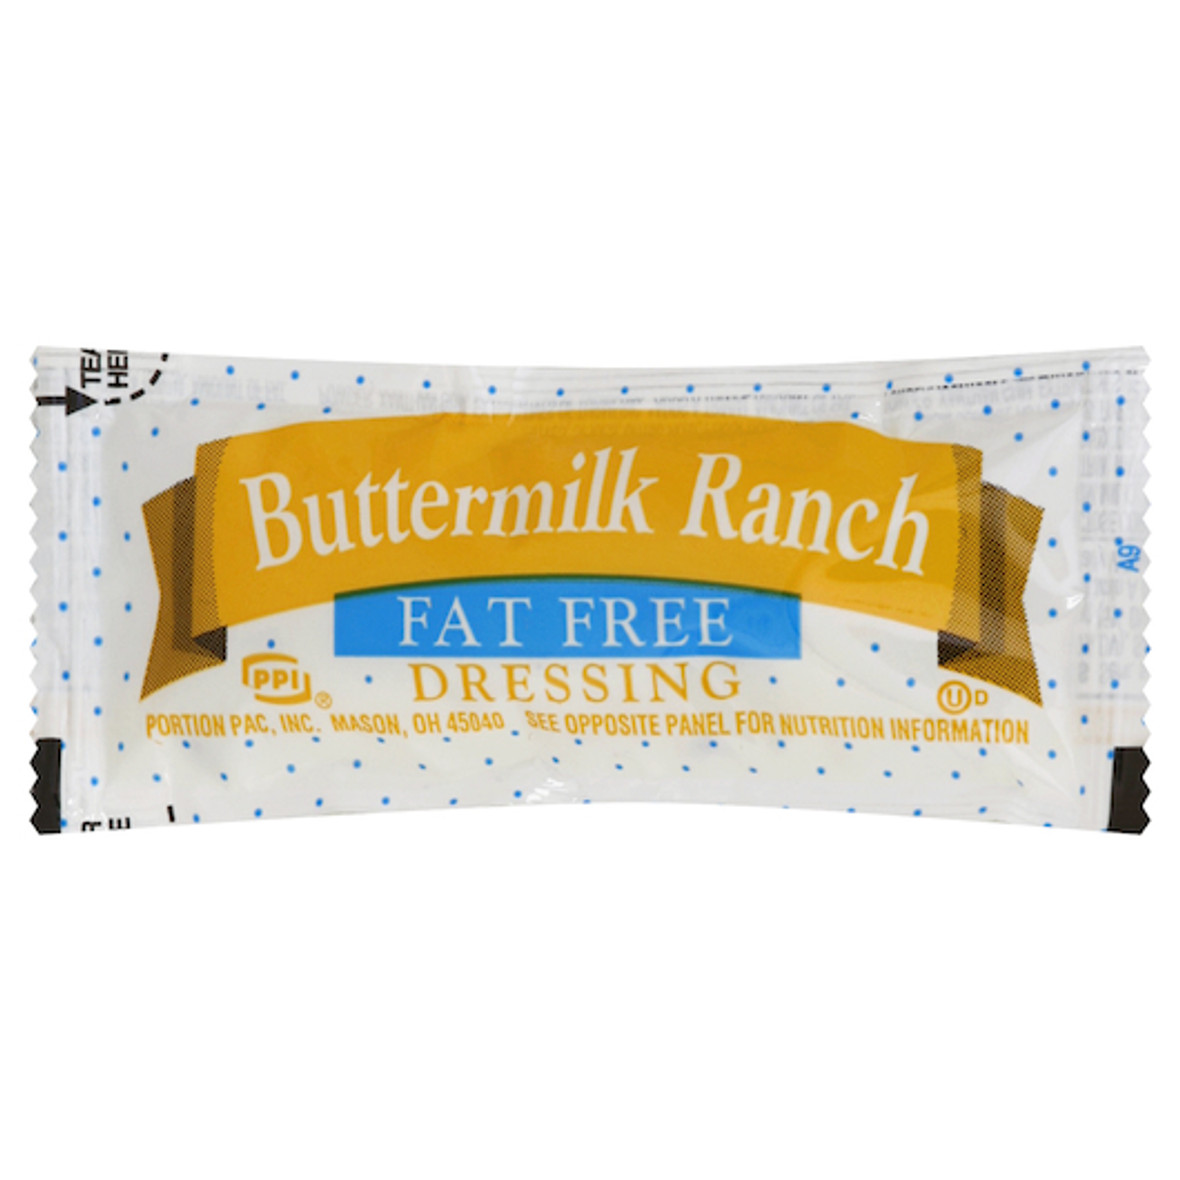 Portion Pack Fat Free Buttermilk Ranch Dressing